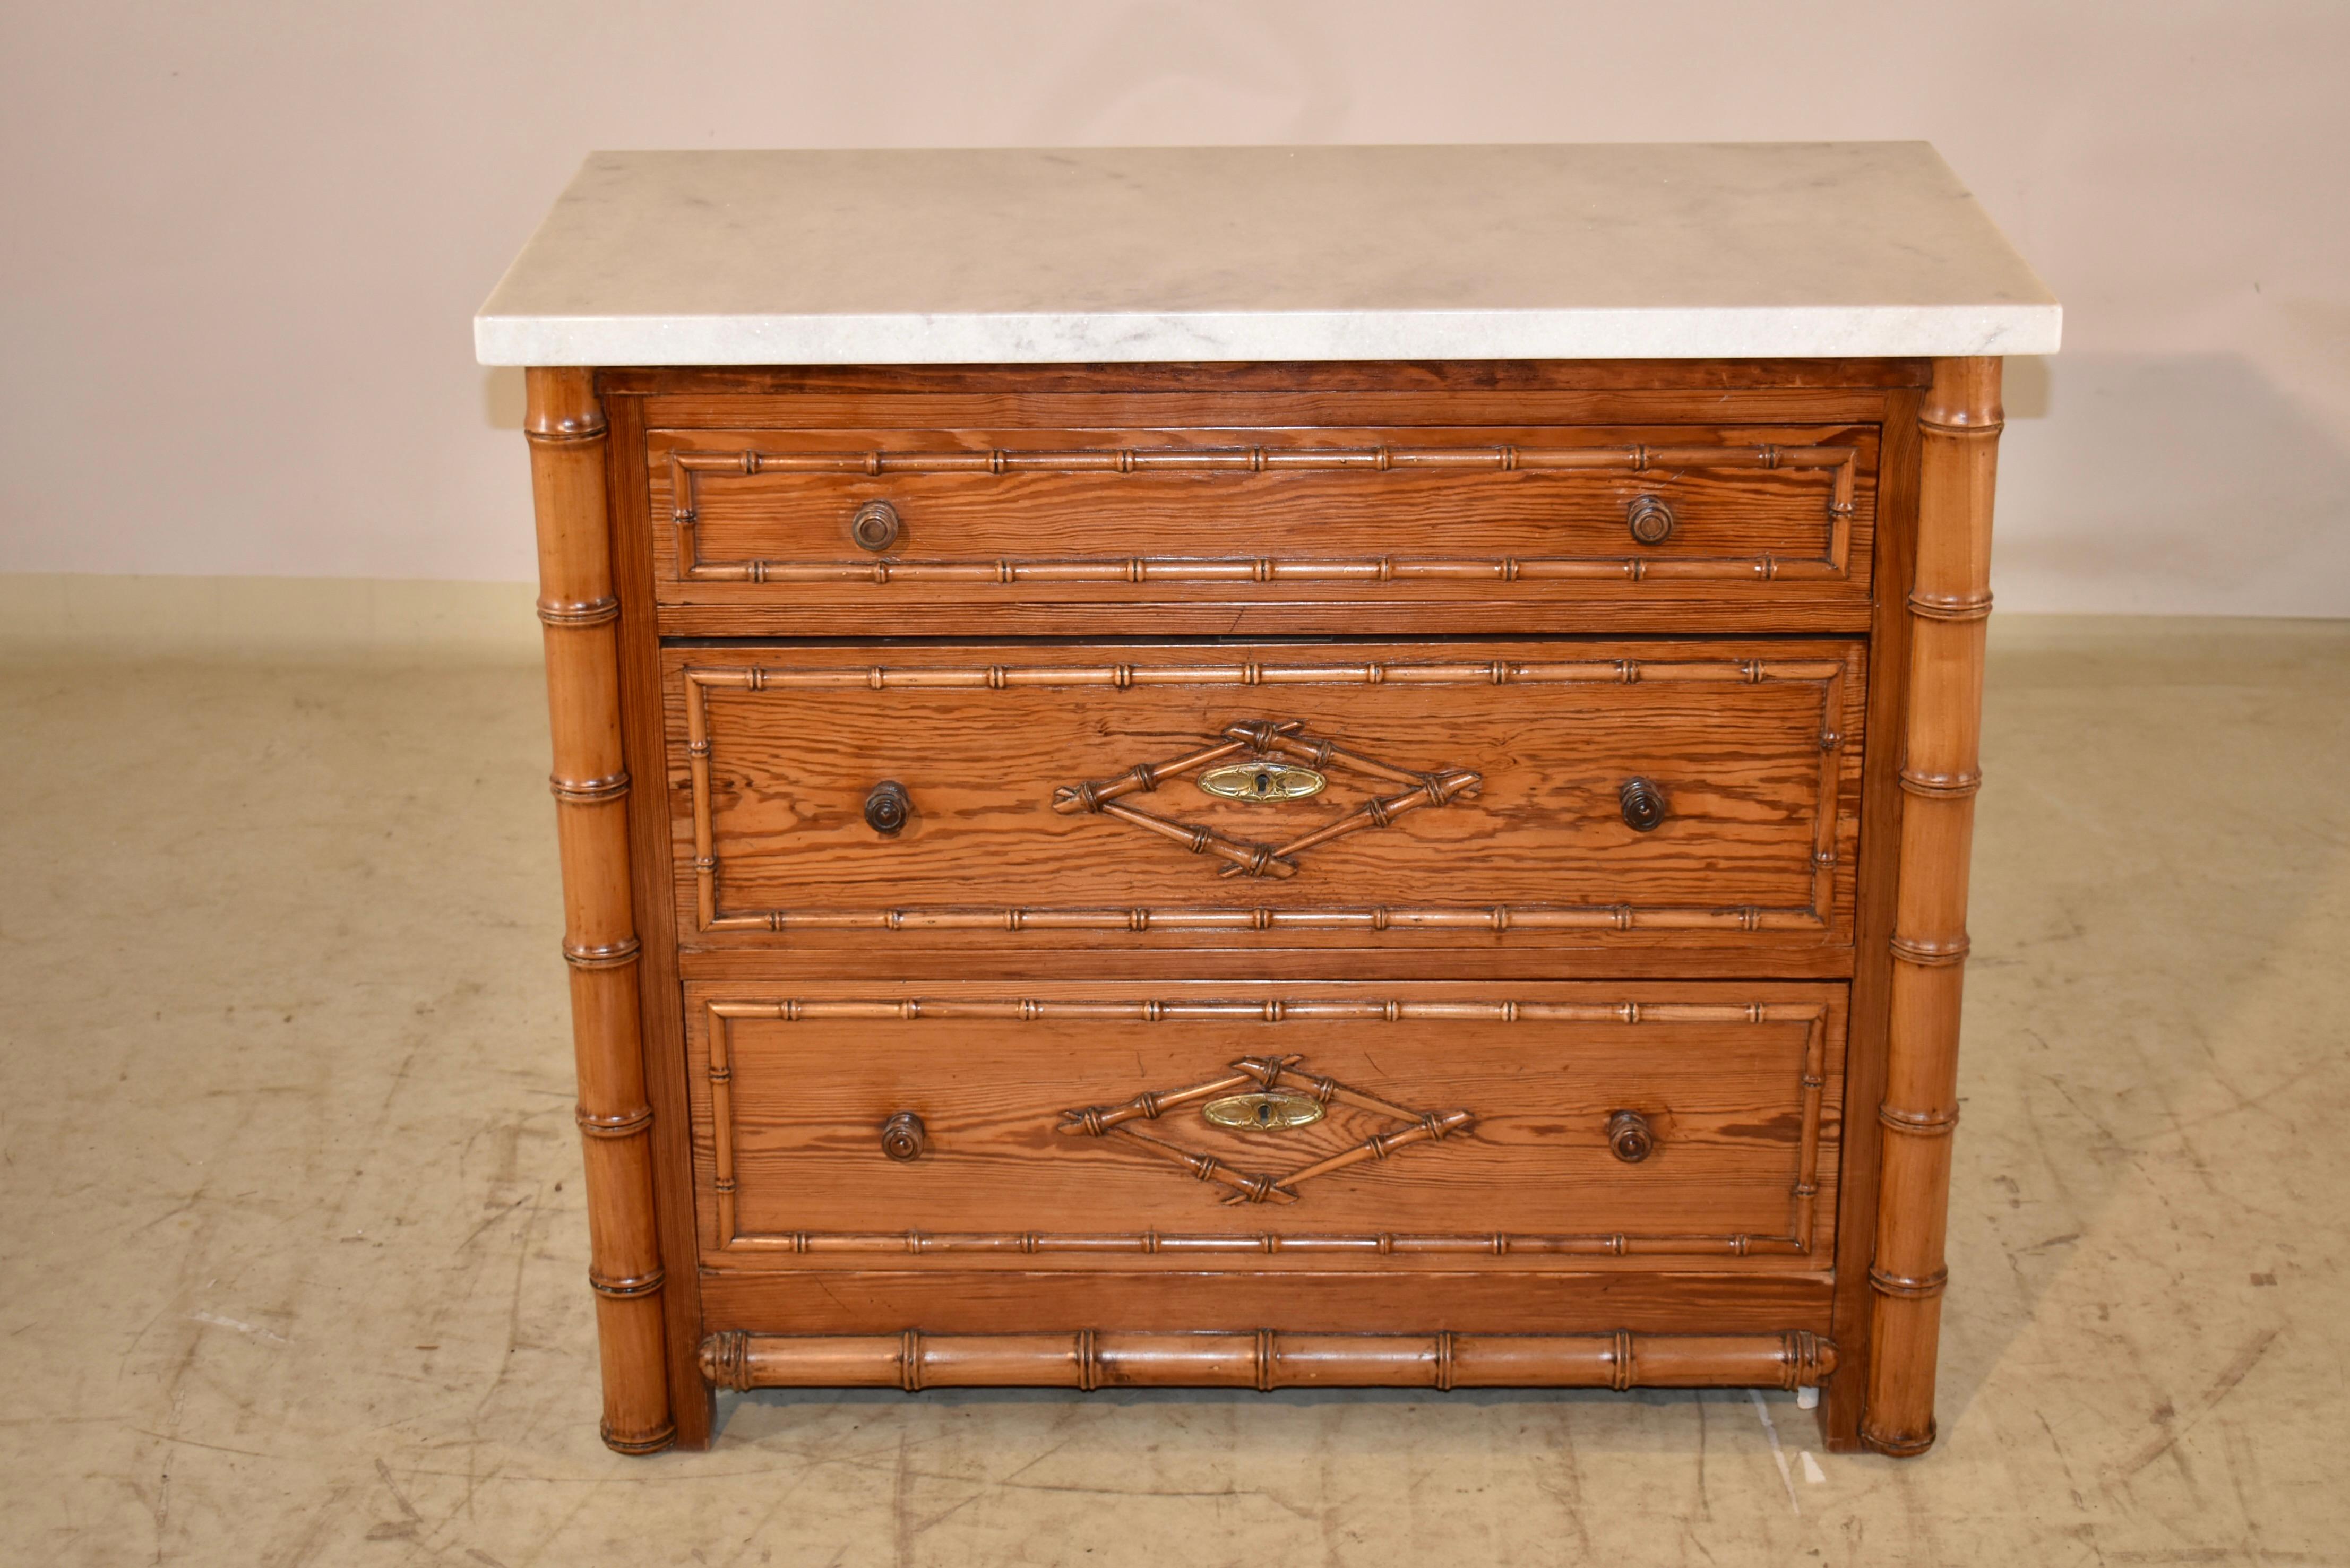 19th century faux bamboo chest of drawers from France.  The top is new and  is made from Carrara marble.  The sides of the chest are simple and paneled , and are finished at the bottom with an applied hand turned faux bamboo style molding.  The